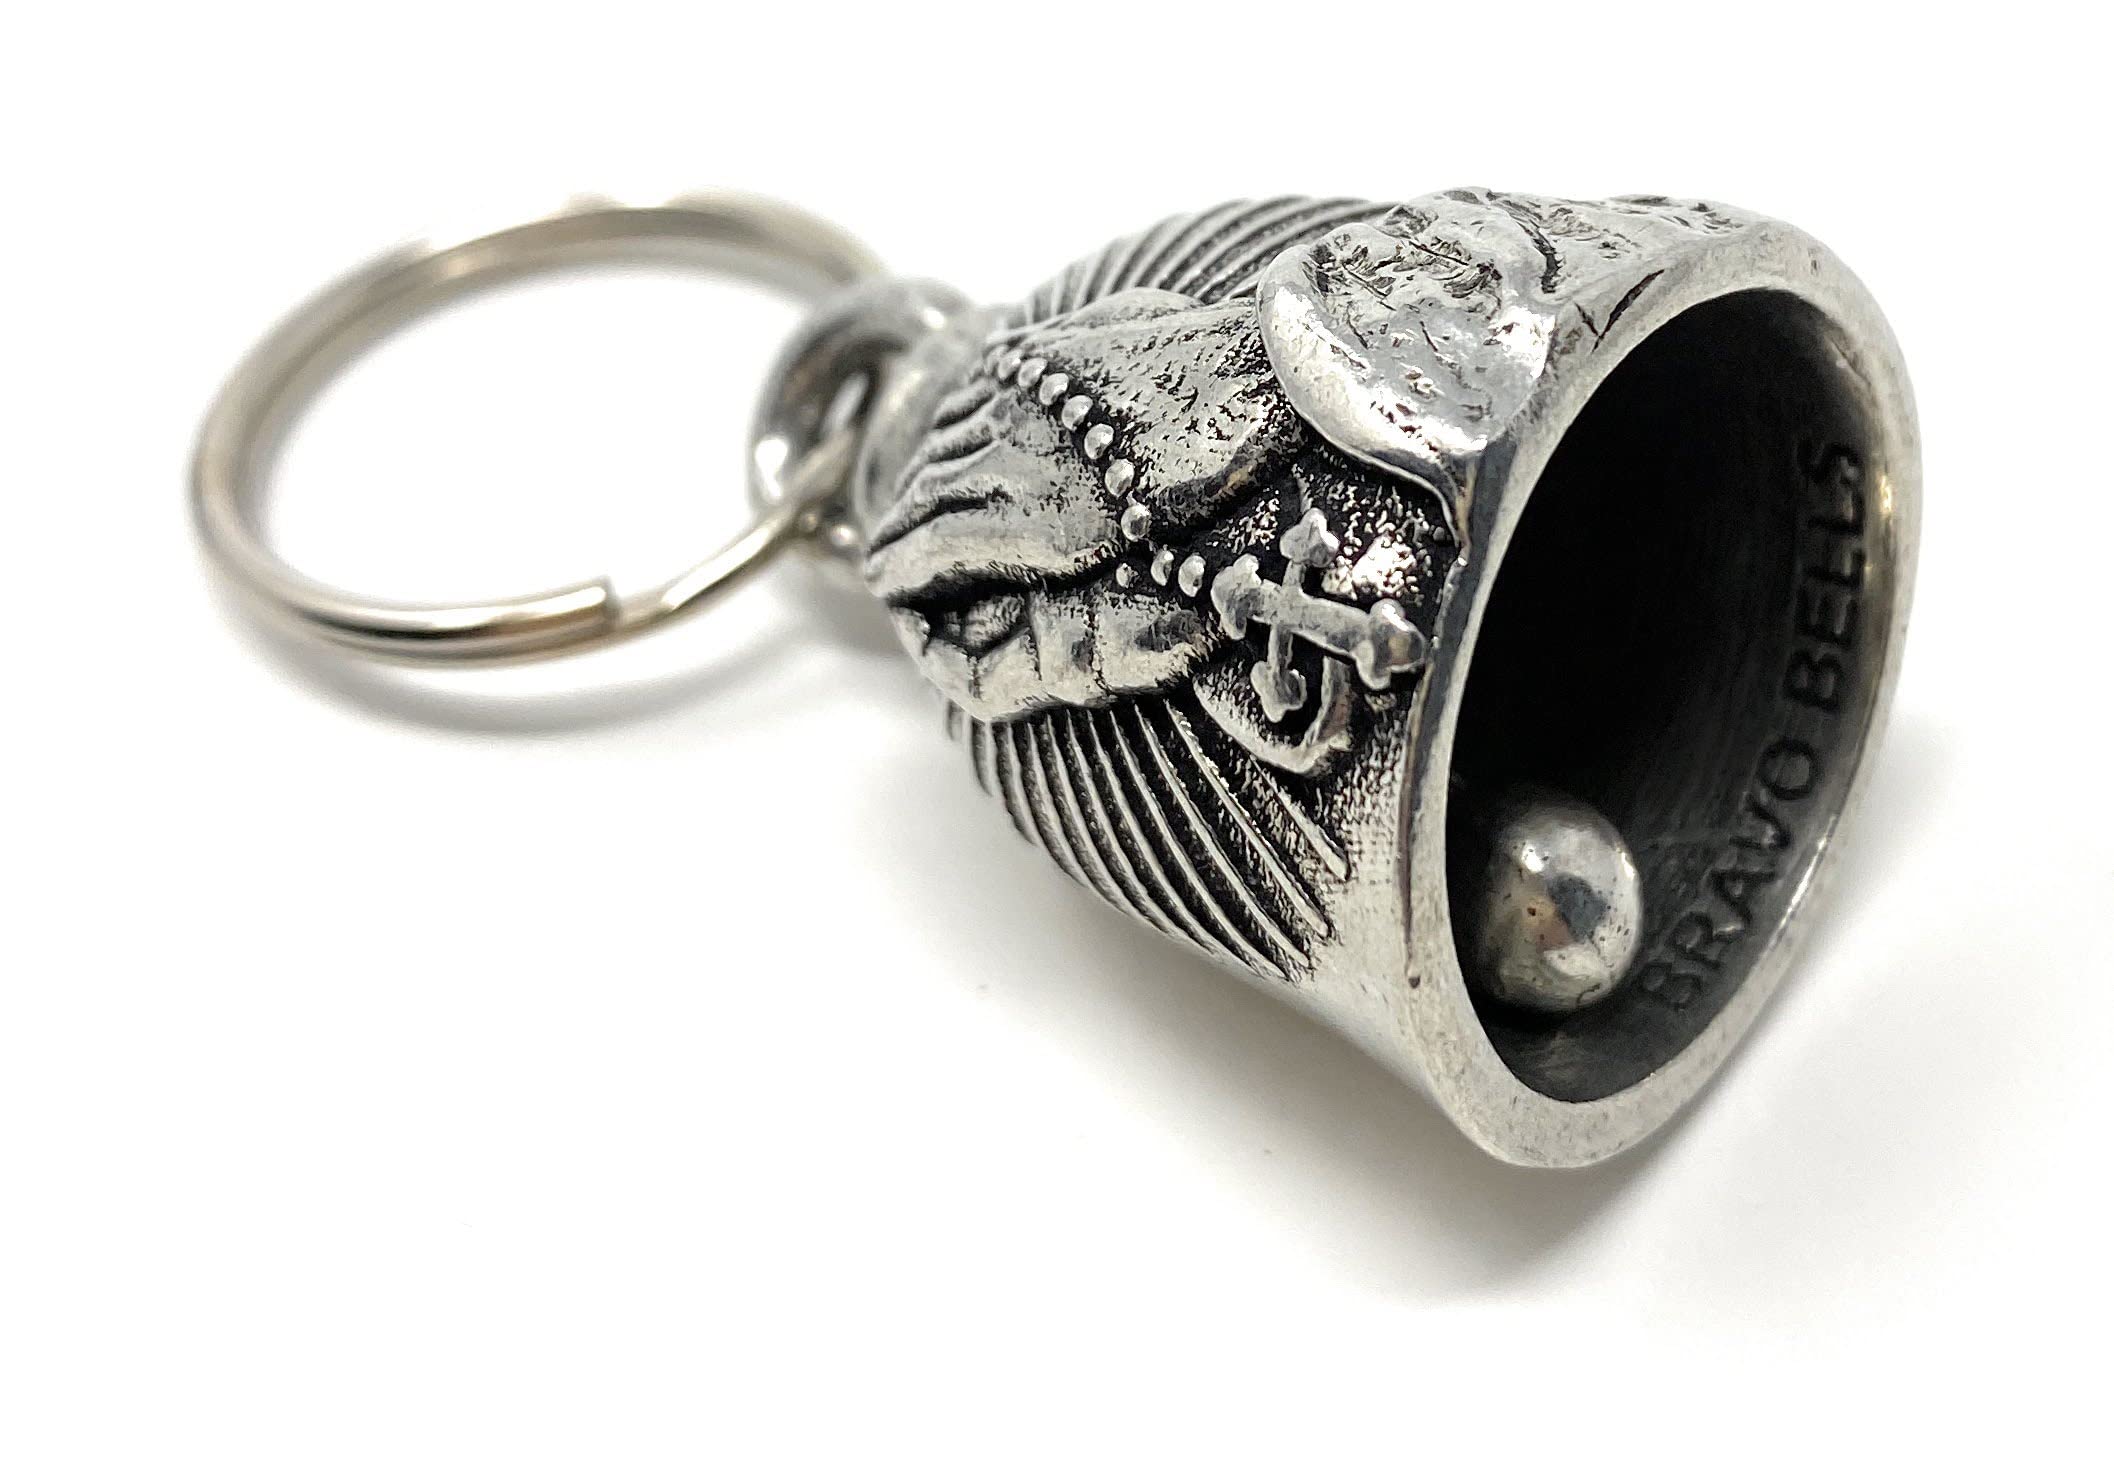 Bravo Bells Pray Hands Bell - Biker Bell Accessory or Key Chain for Good Luck on The Road